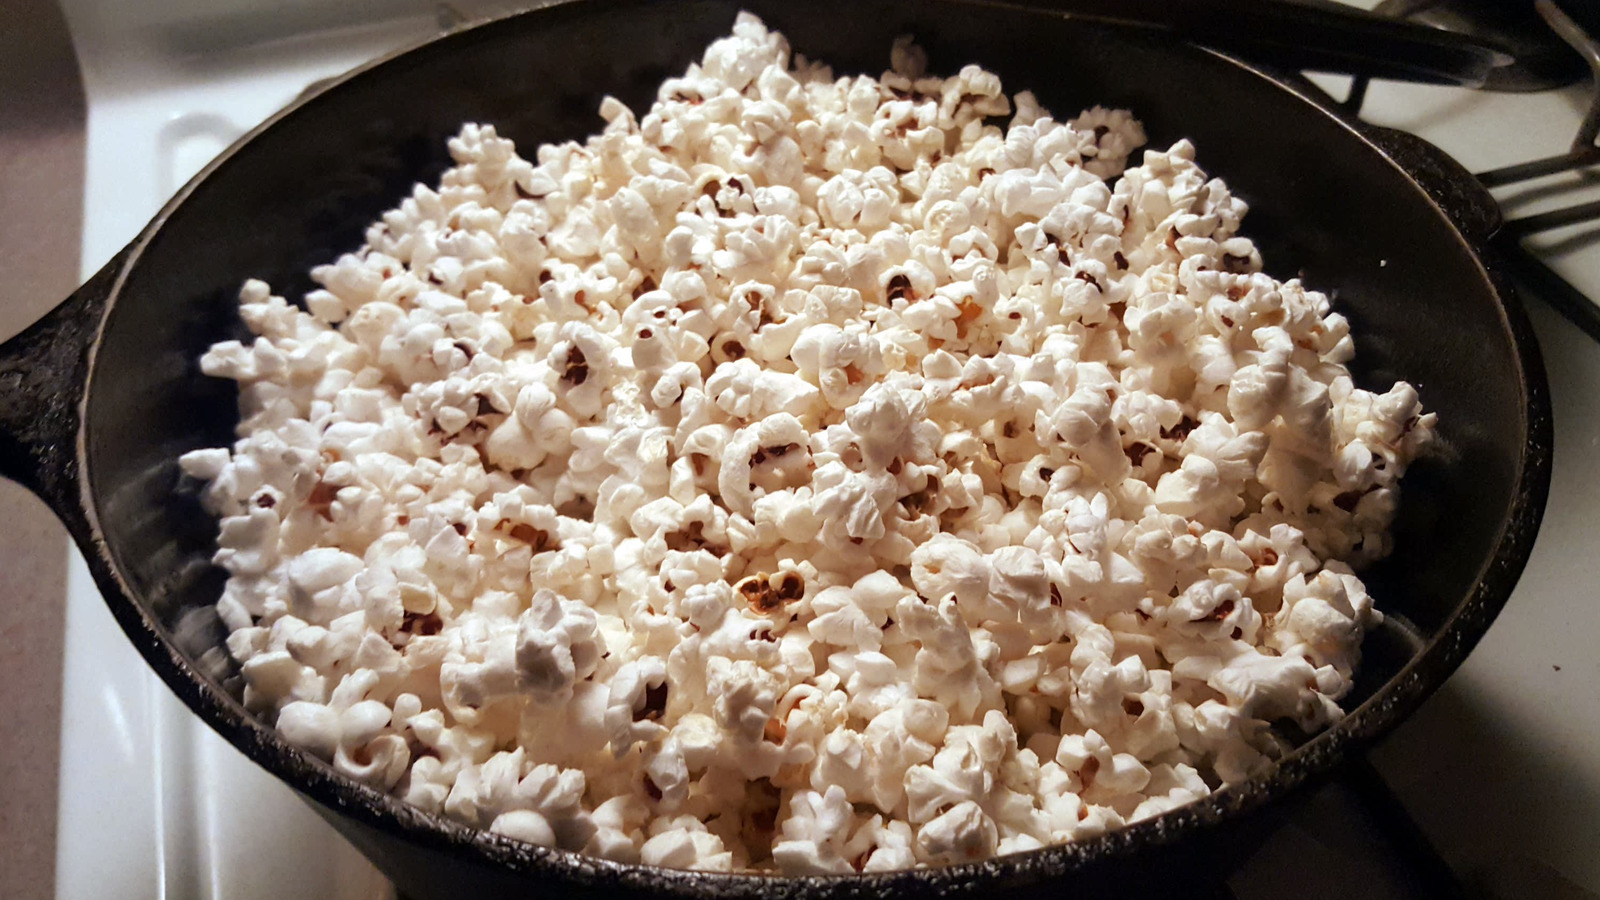 https://www.tastingtable.com/img/gallery/bacon-fat-is-the-secret-ingredient-for-delicious-stovetop-popcorn/l-intro-1690408962.jpg